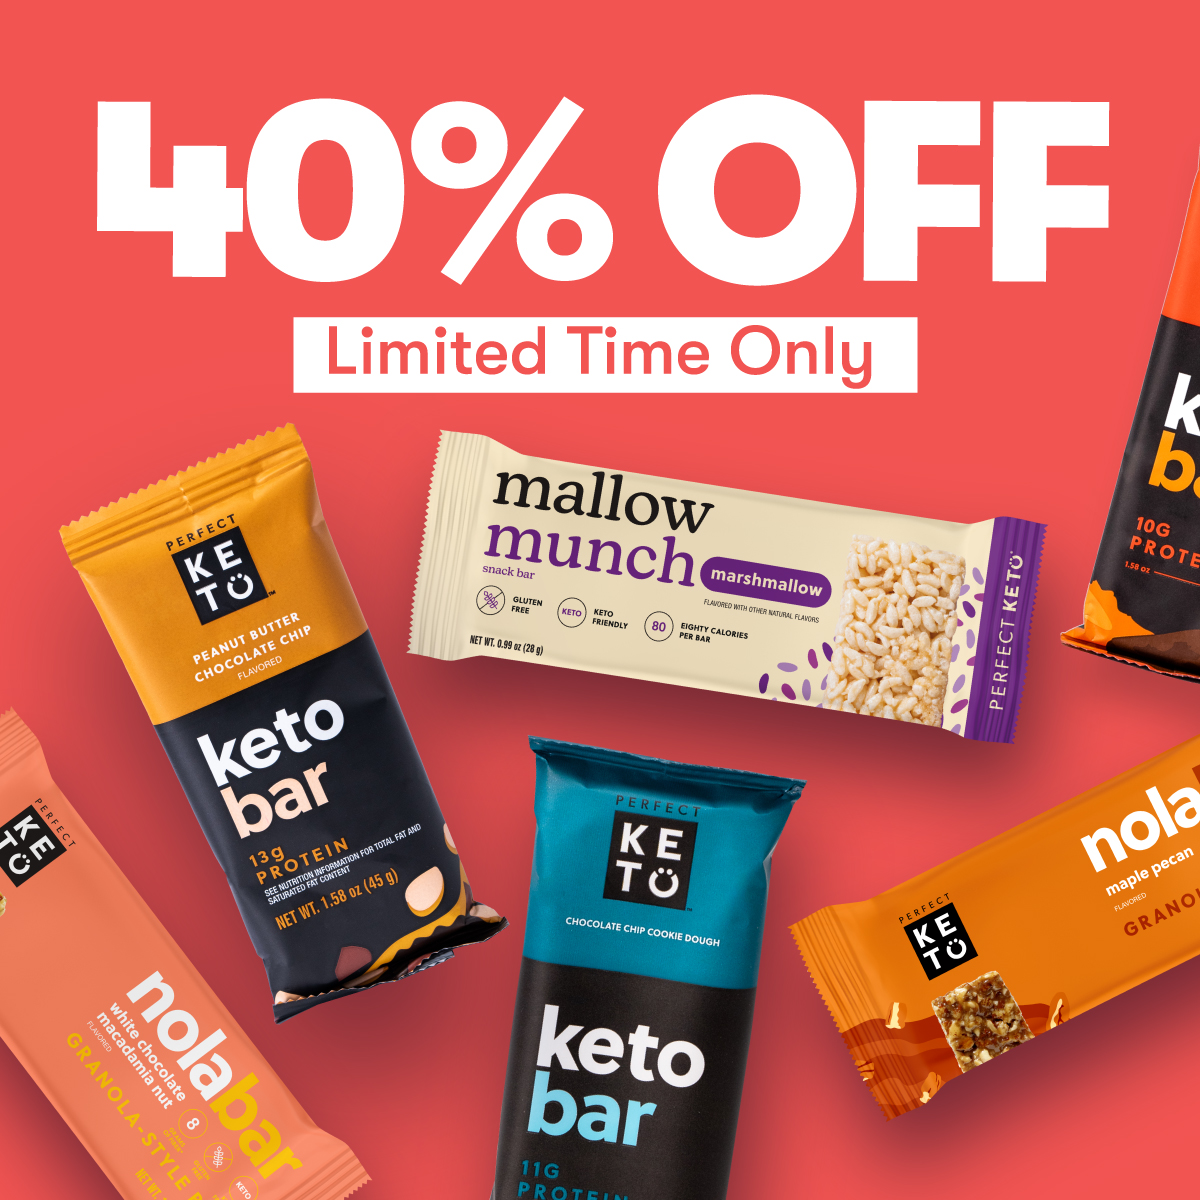 It’s time to RAISE THE BAR! 🍫 🙌And by “raise the bar” I mean: make that keto life easier, more affordable, and tastier. The best way to do that? Put it on auto-pilot with a subscription. 🎉When you subscribe to #PerfectKeto’s MVP Mallow Munch Bars, Nola Bars, or Perfect Keto